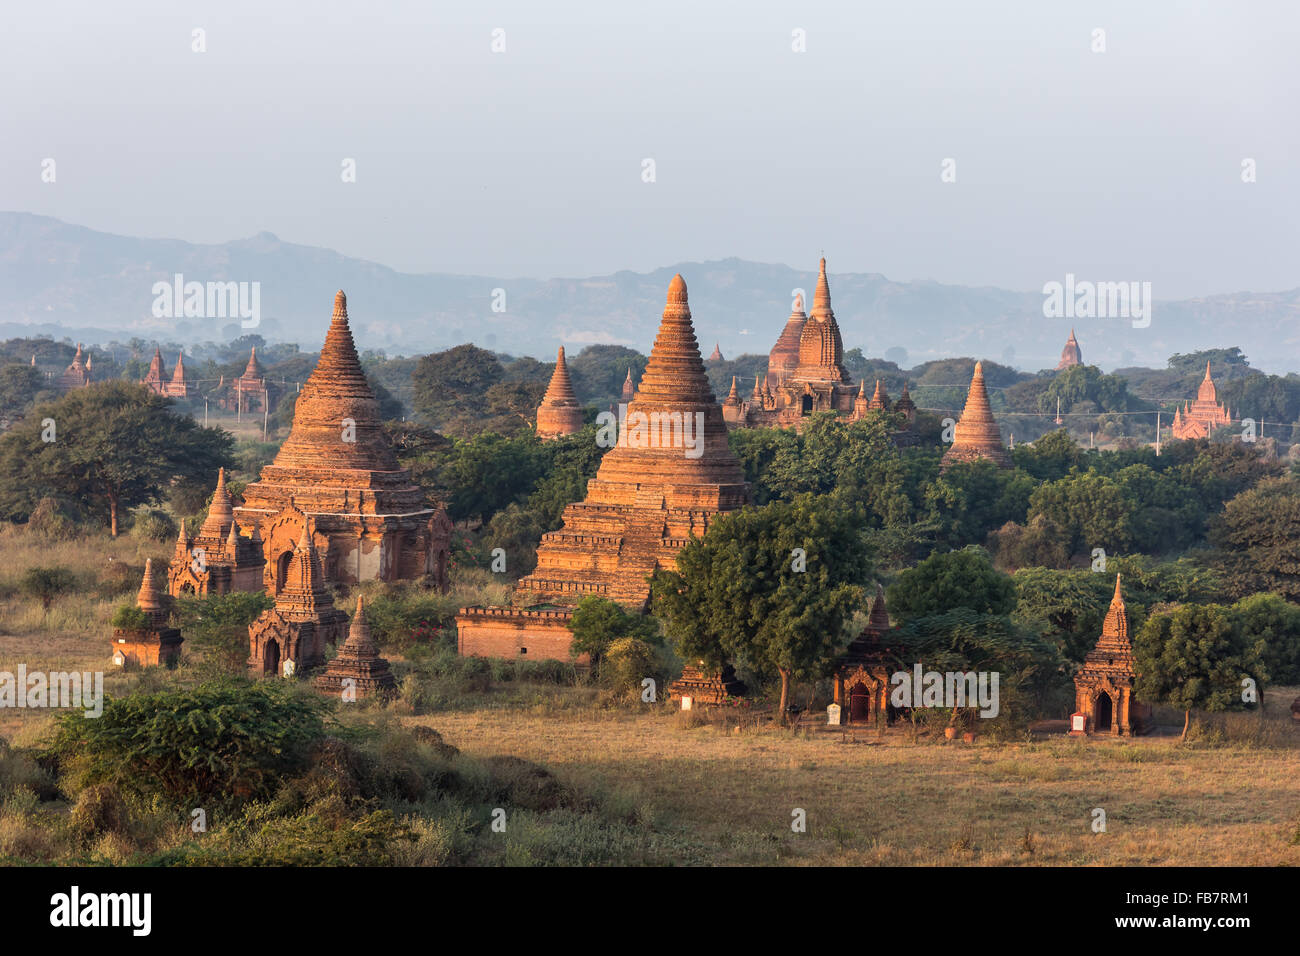 View from the Shwe Sandaw Pagoda during sunset in Bagan, Myanmar Stock Photo